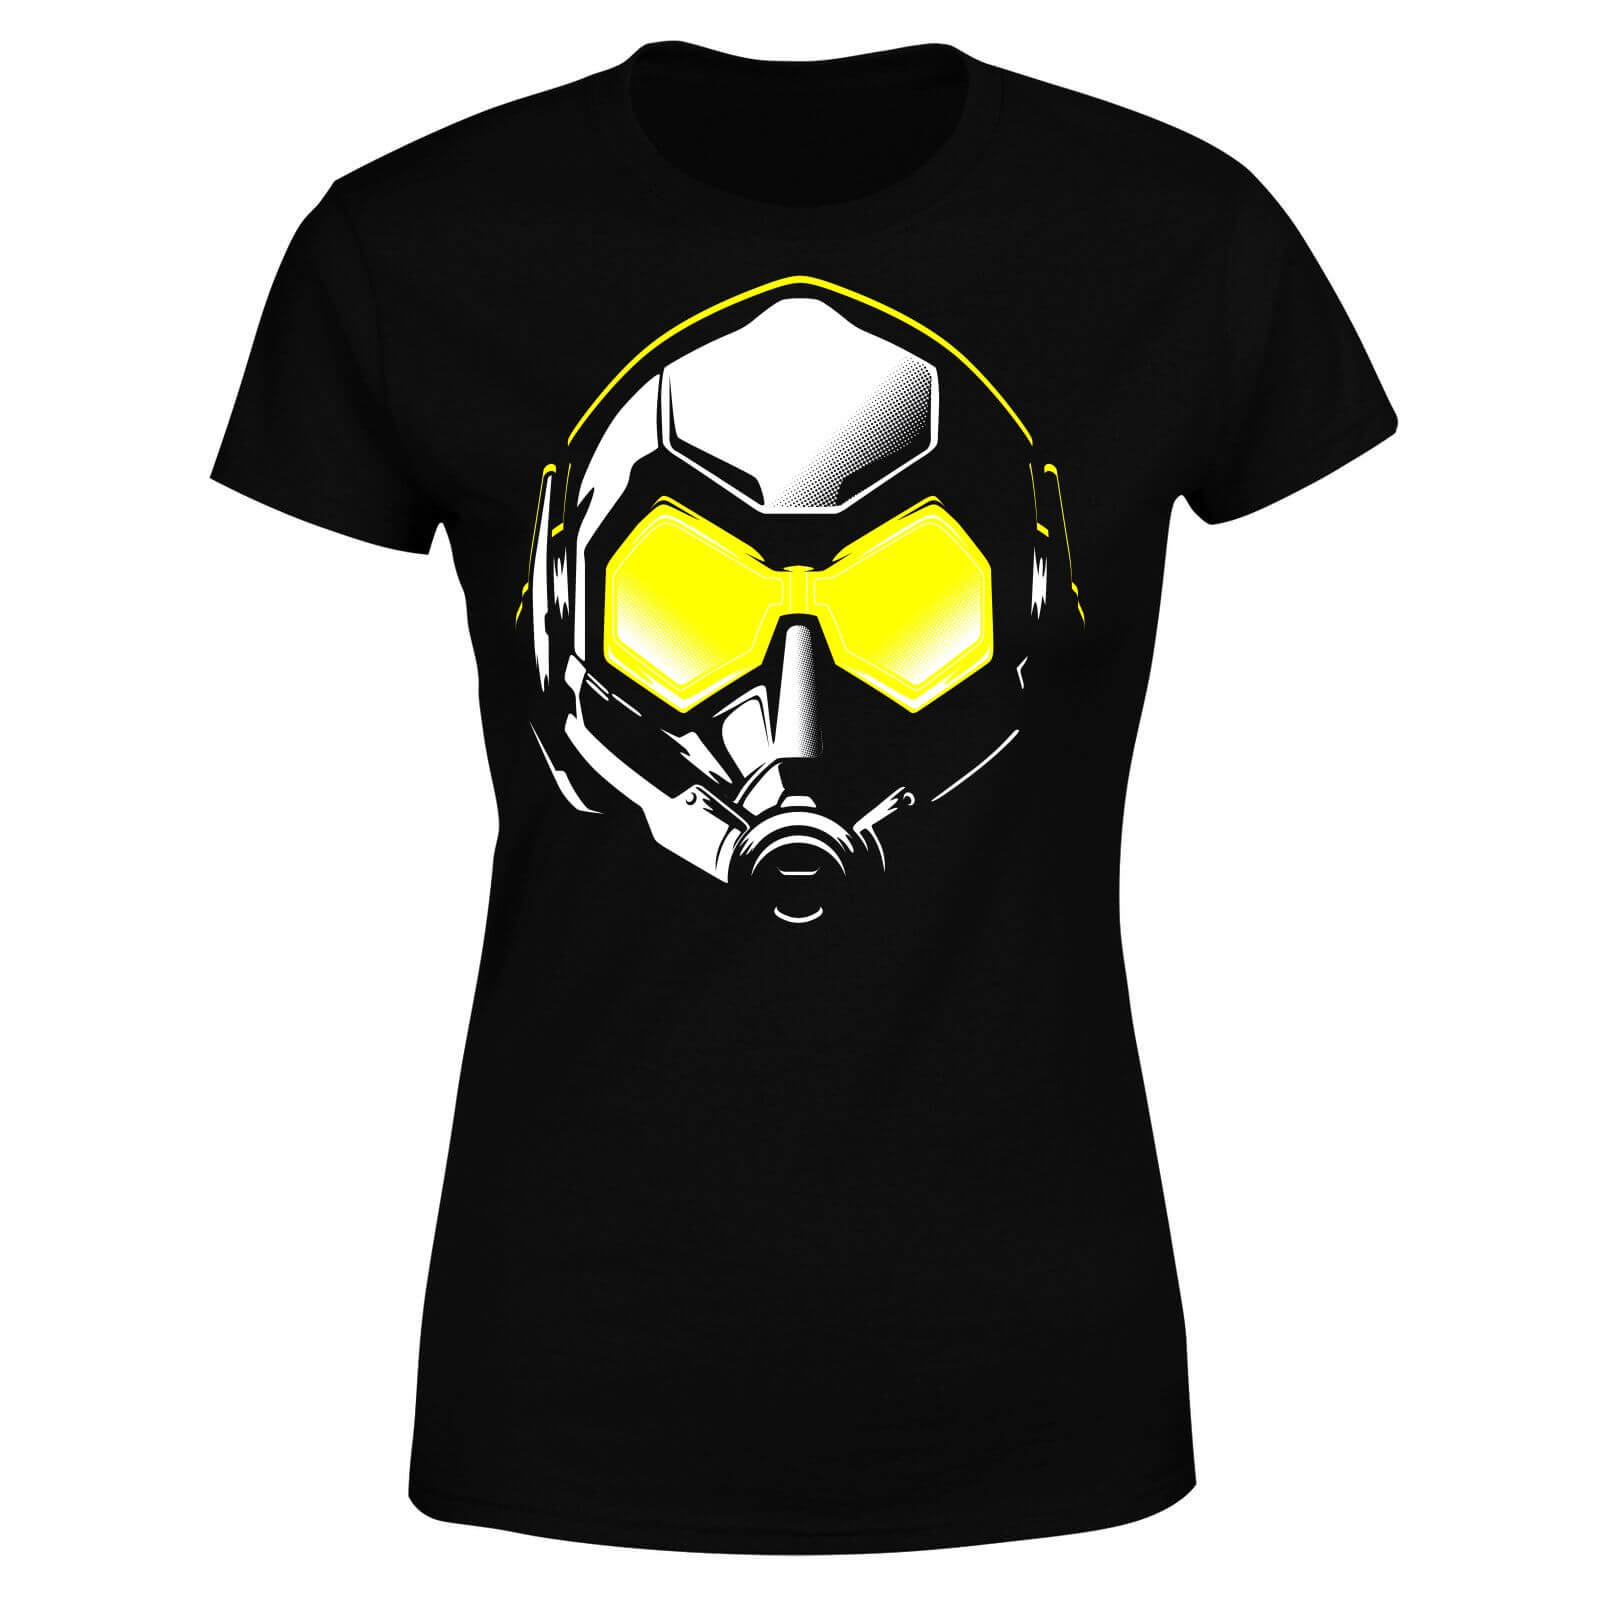 Ant-Man And The Wasp Hope Mask Women's T-Shirt - Black - M